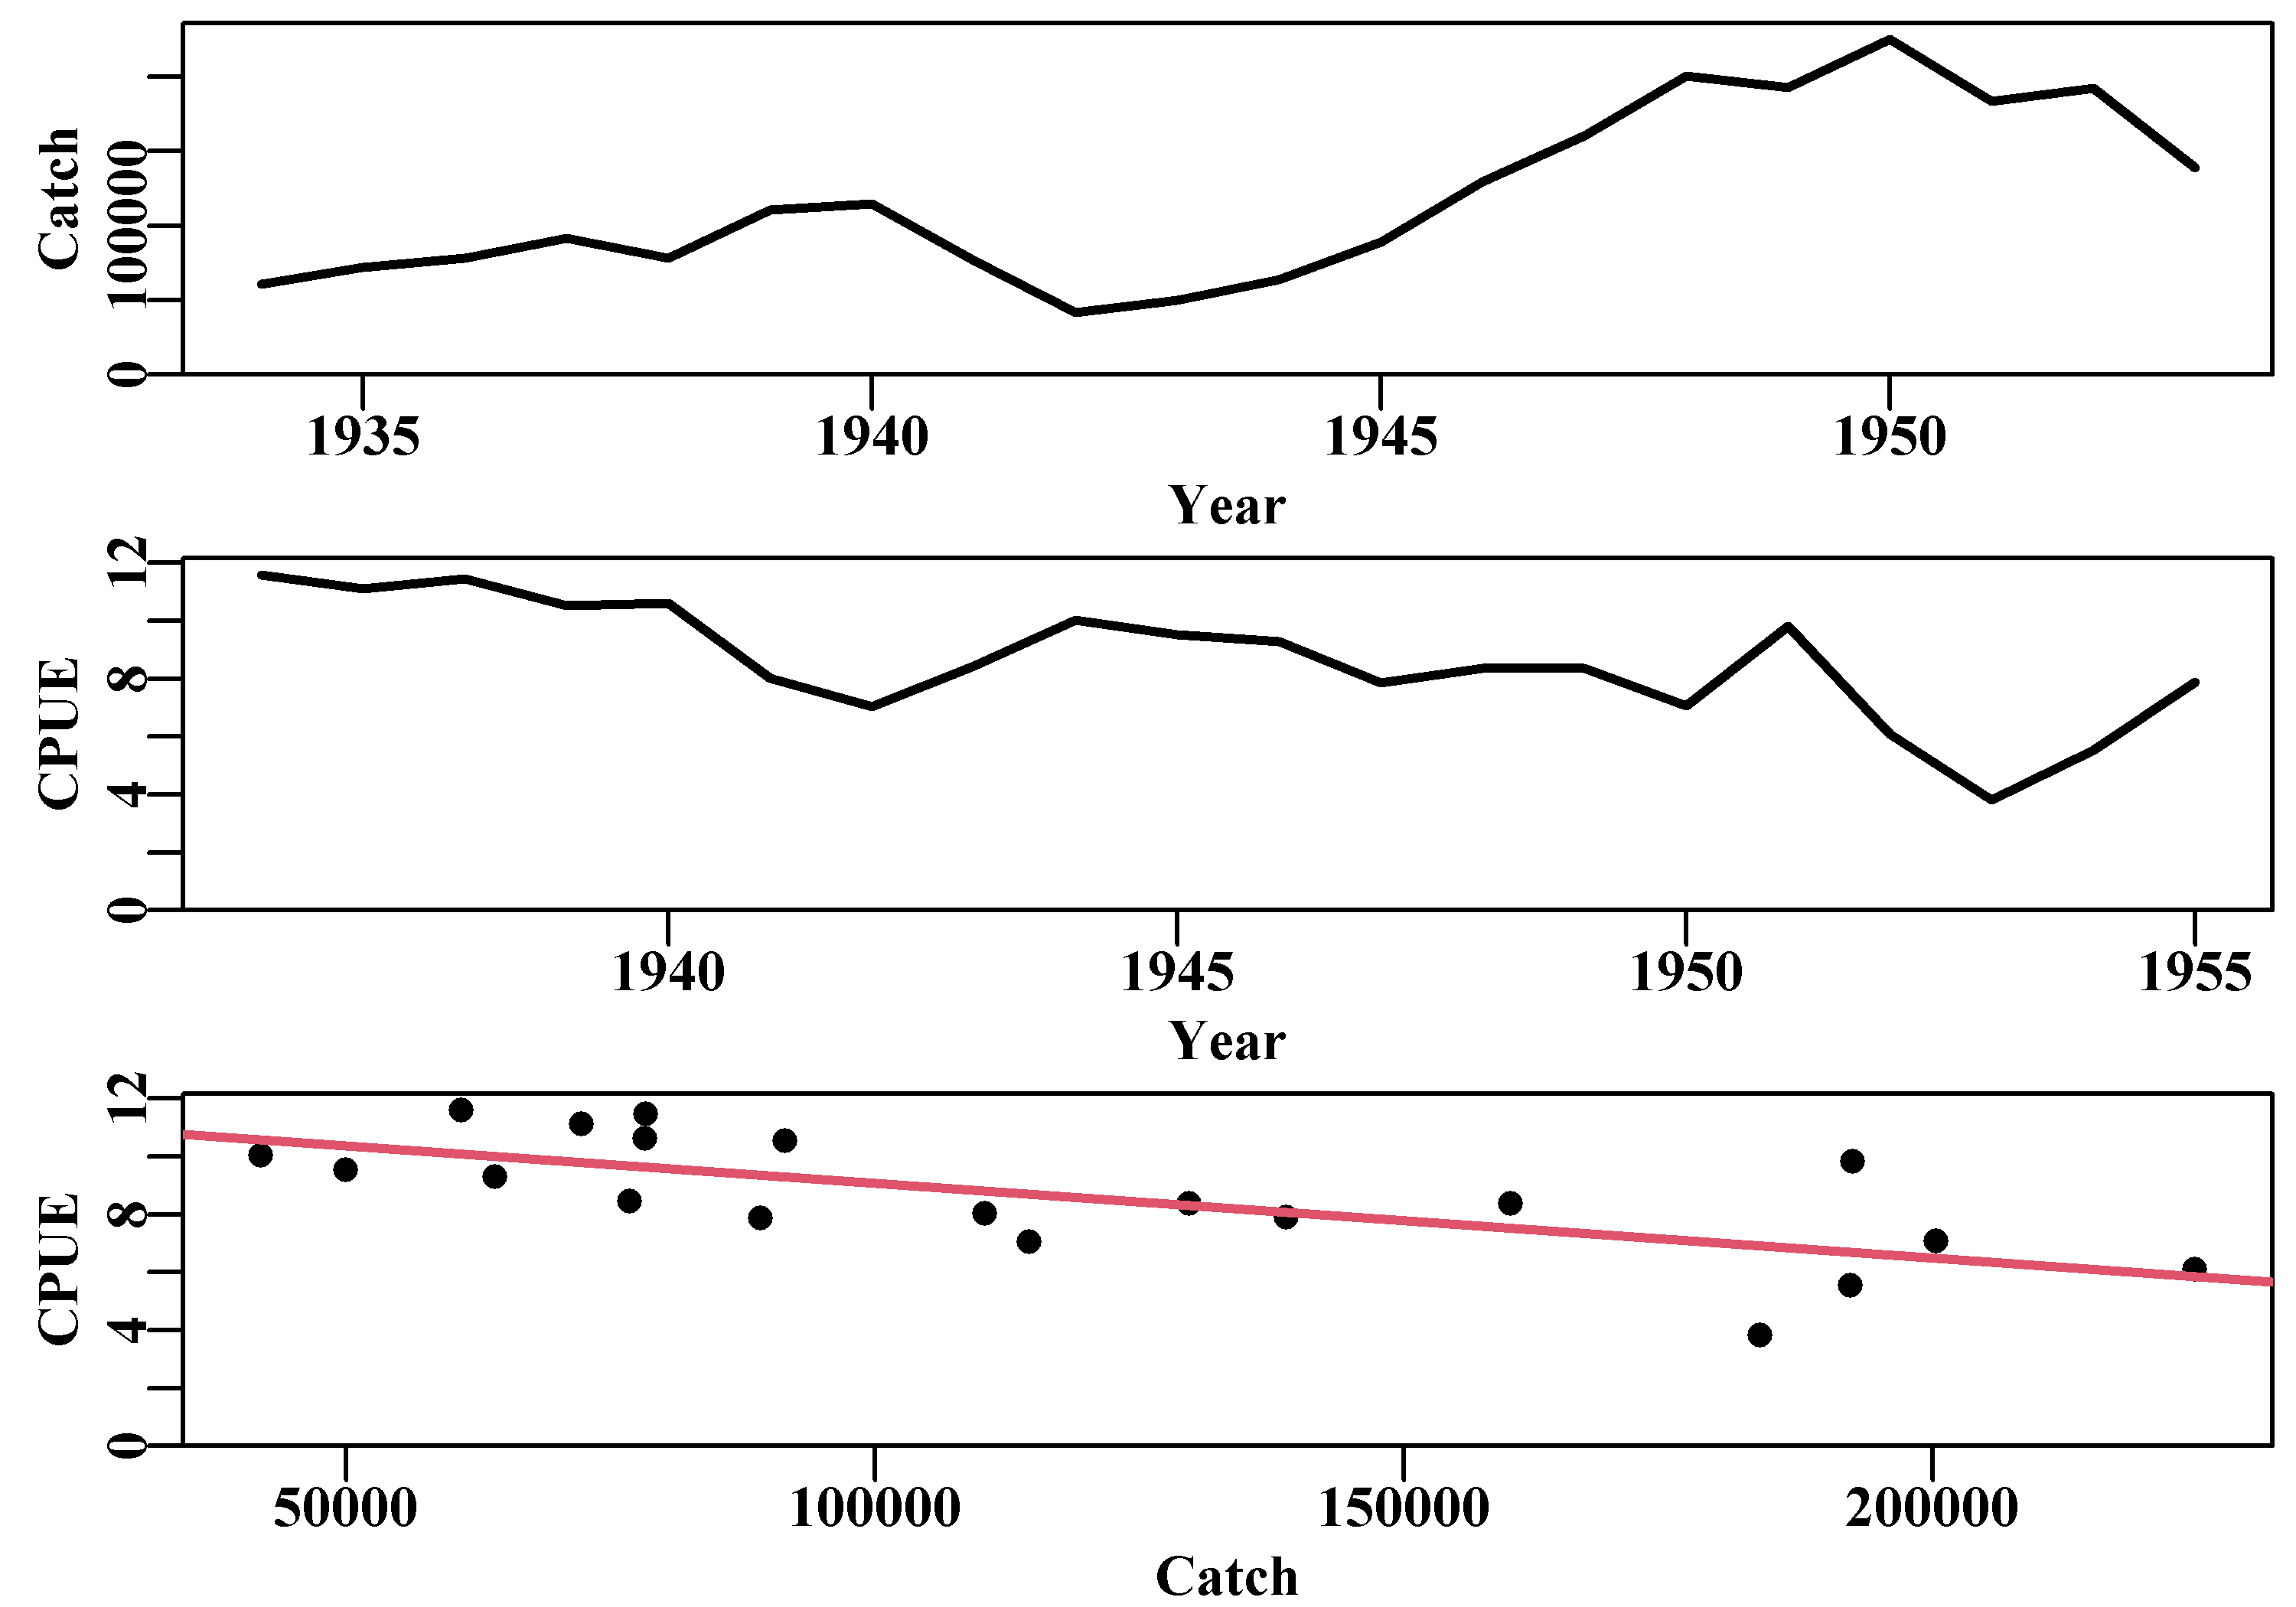 The catches and cpue, and their relationship, for the Schaefer (1957) yellowfin tuna fishery data. With a negative lag of 2 years on the cpue time-series the negative or inverse correlation becomes more apparent.